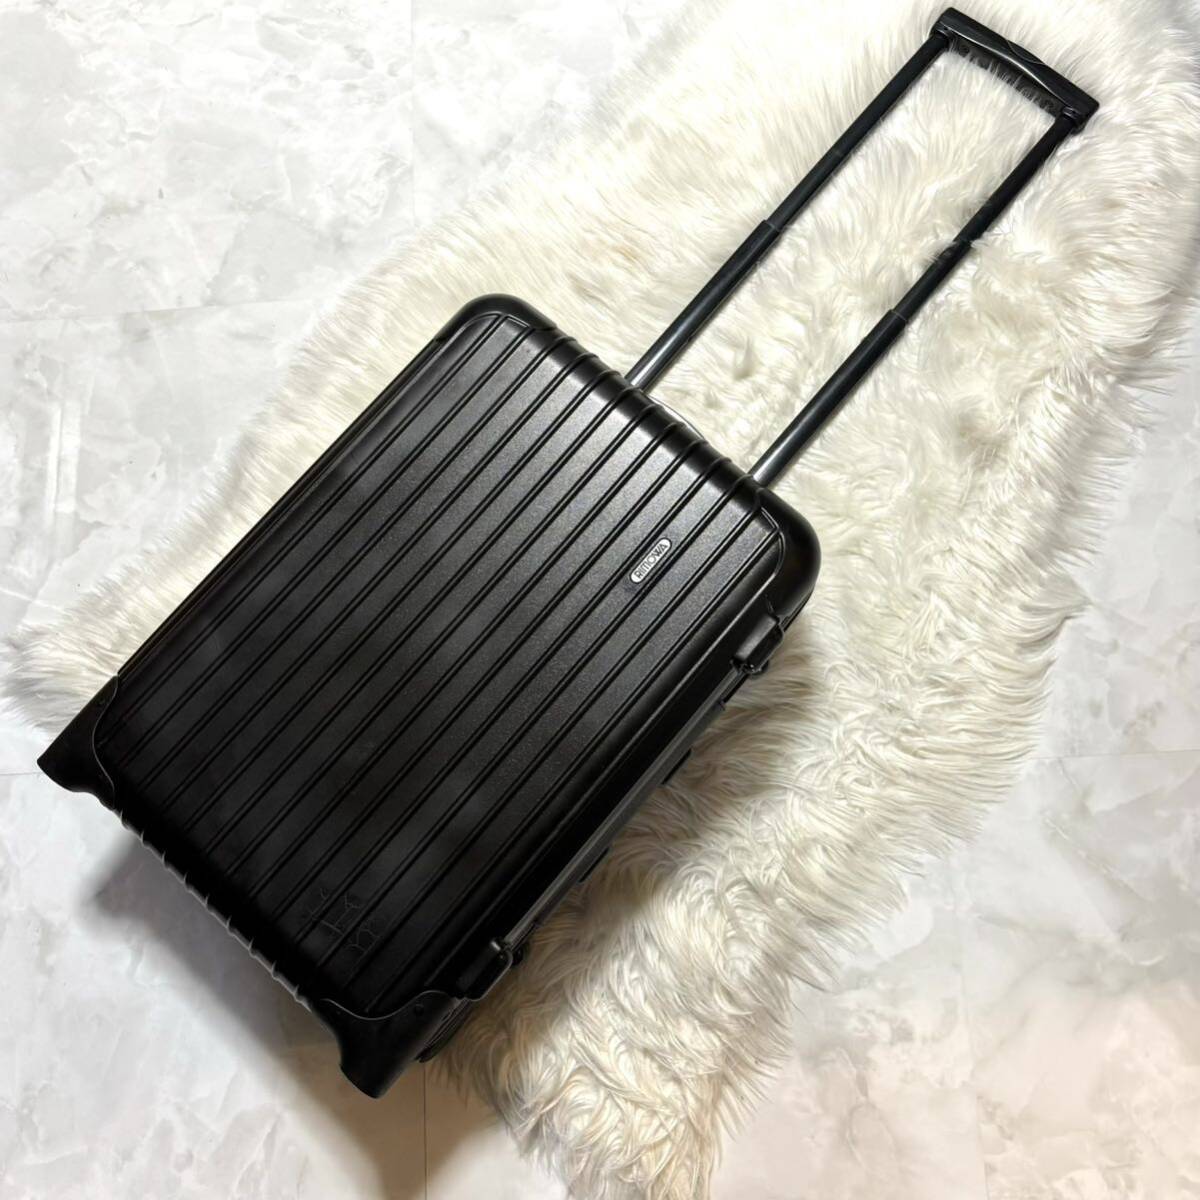  genuine article Rimowa salsa leather switch two wheel suit Carry case black machine inside bringing in size RIMOWA SALSA